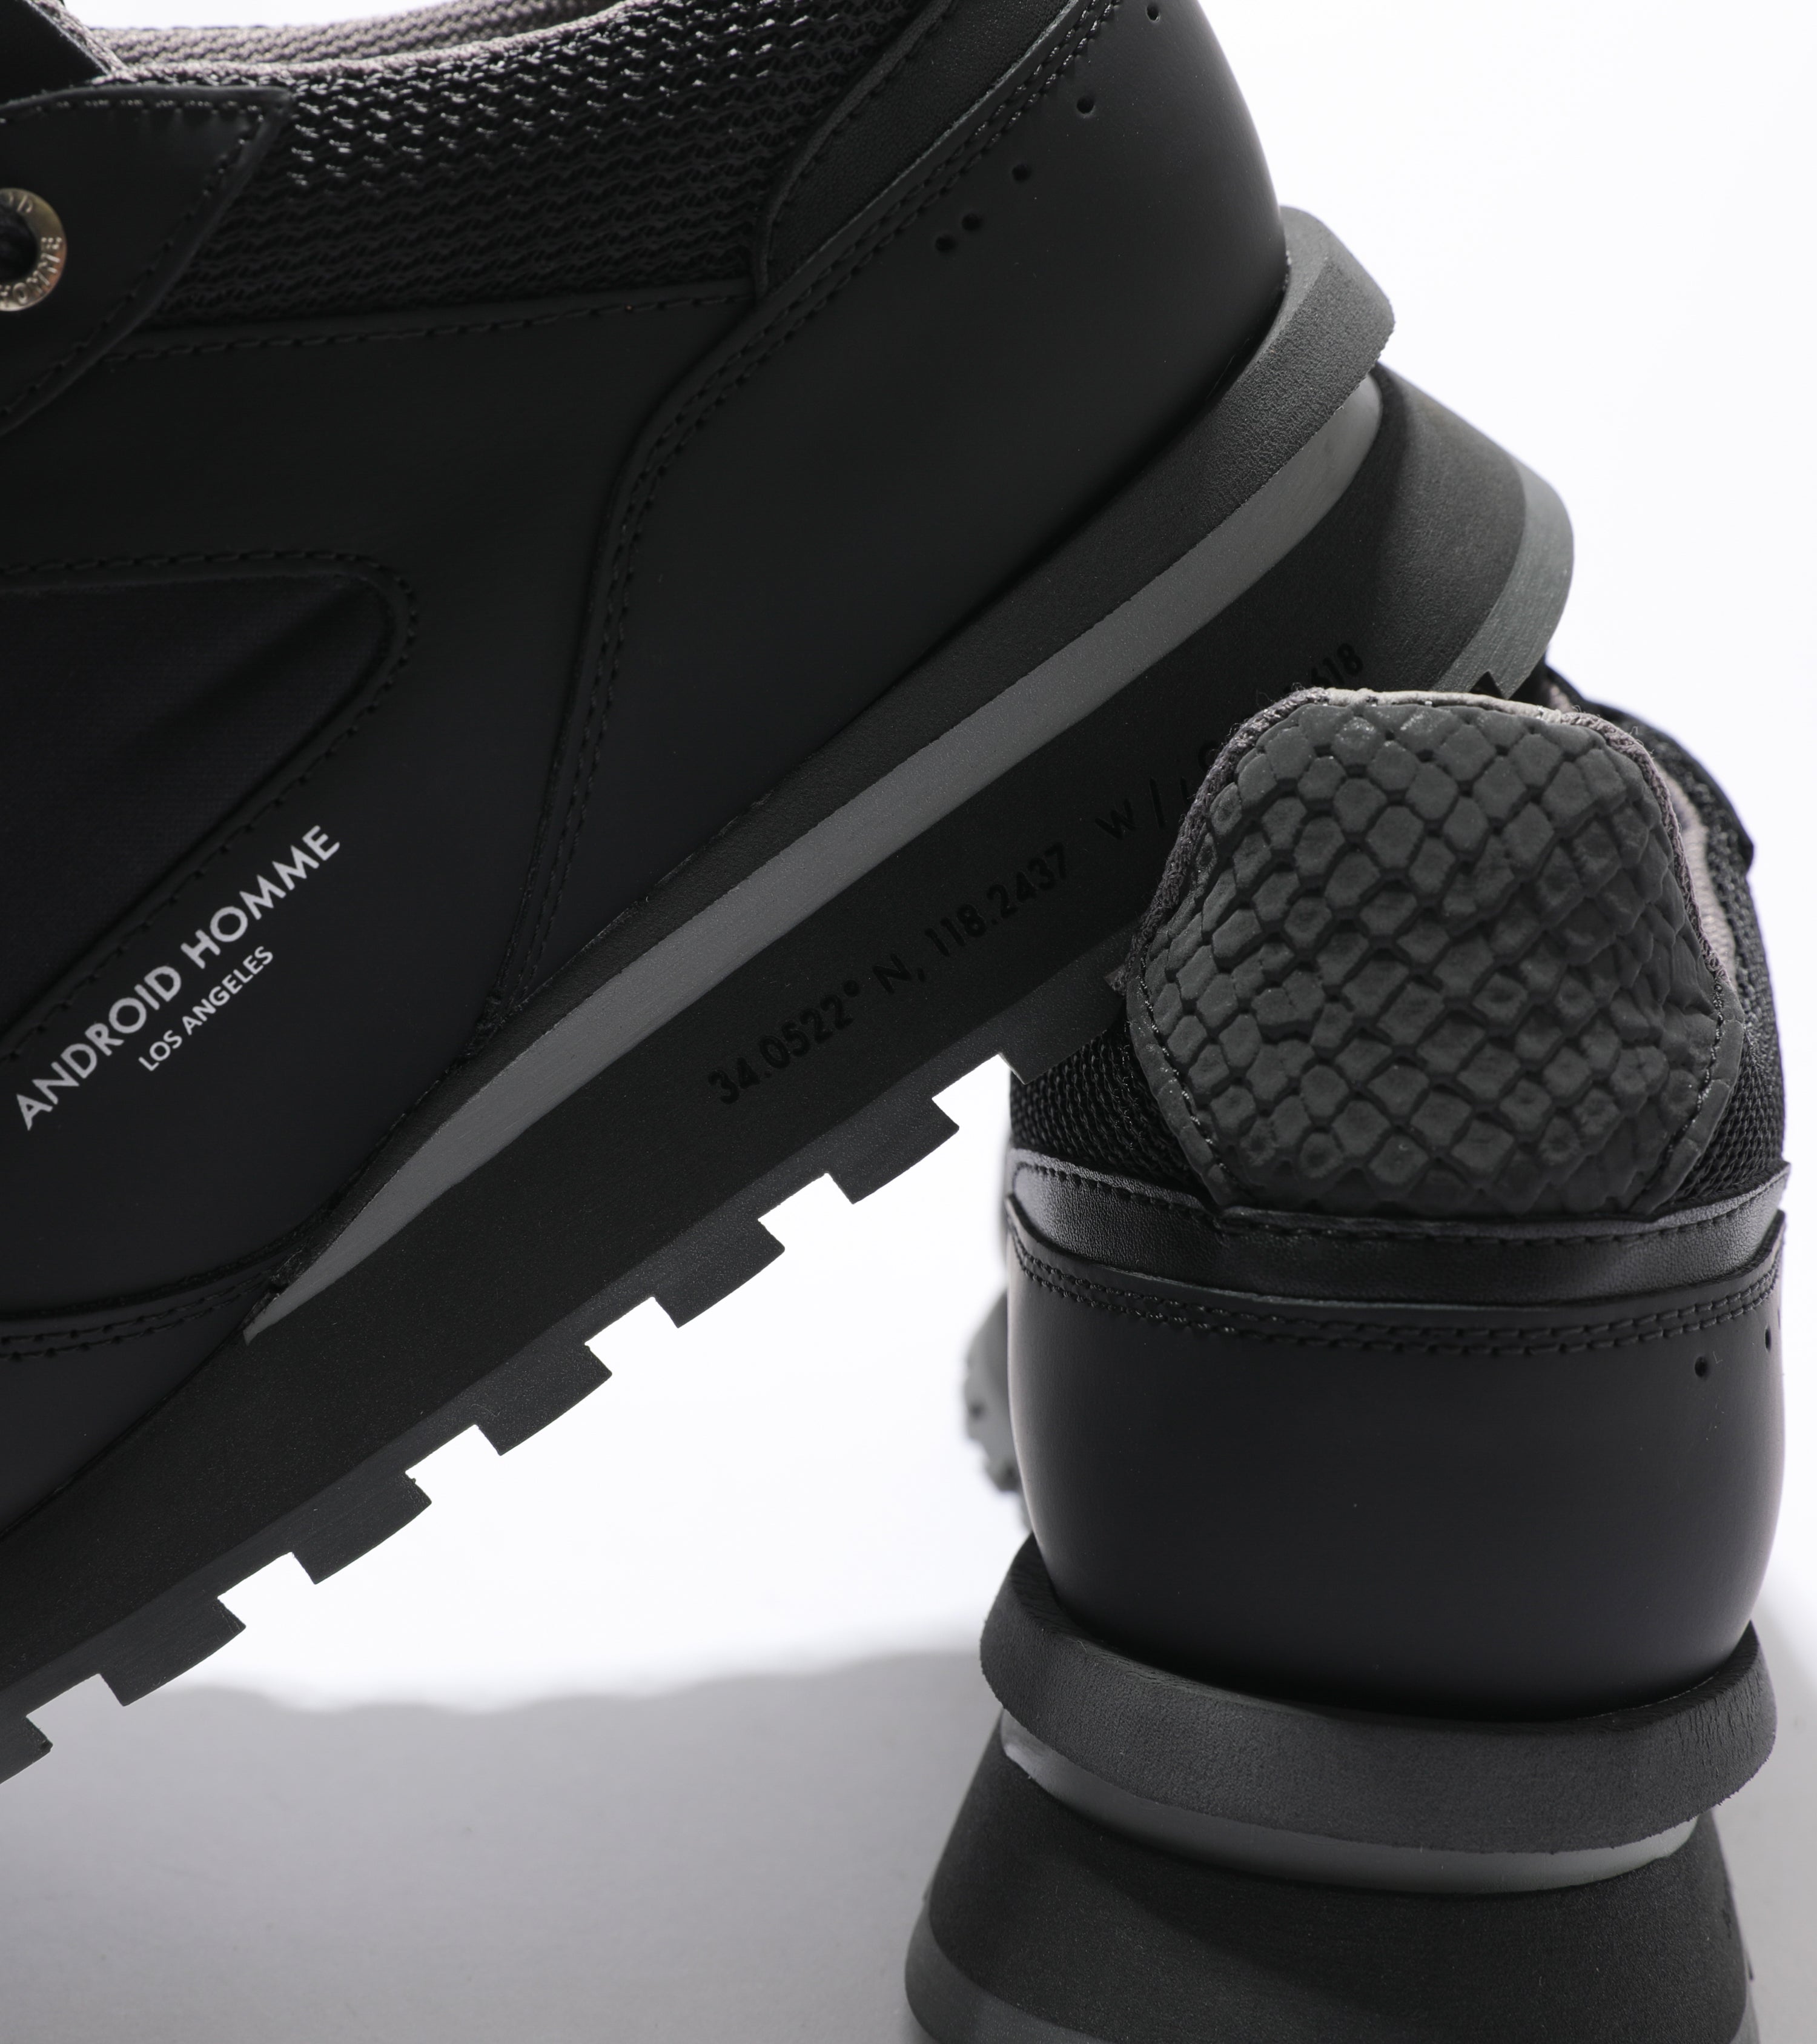 Detailed ecom imagery of the Lechuza Racer Black Gomma Reflective Python Android Homme Trainers.